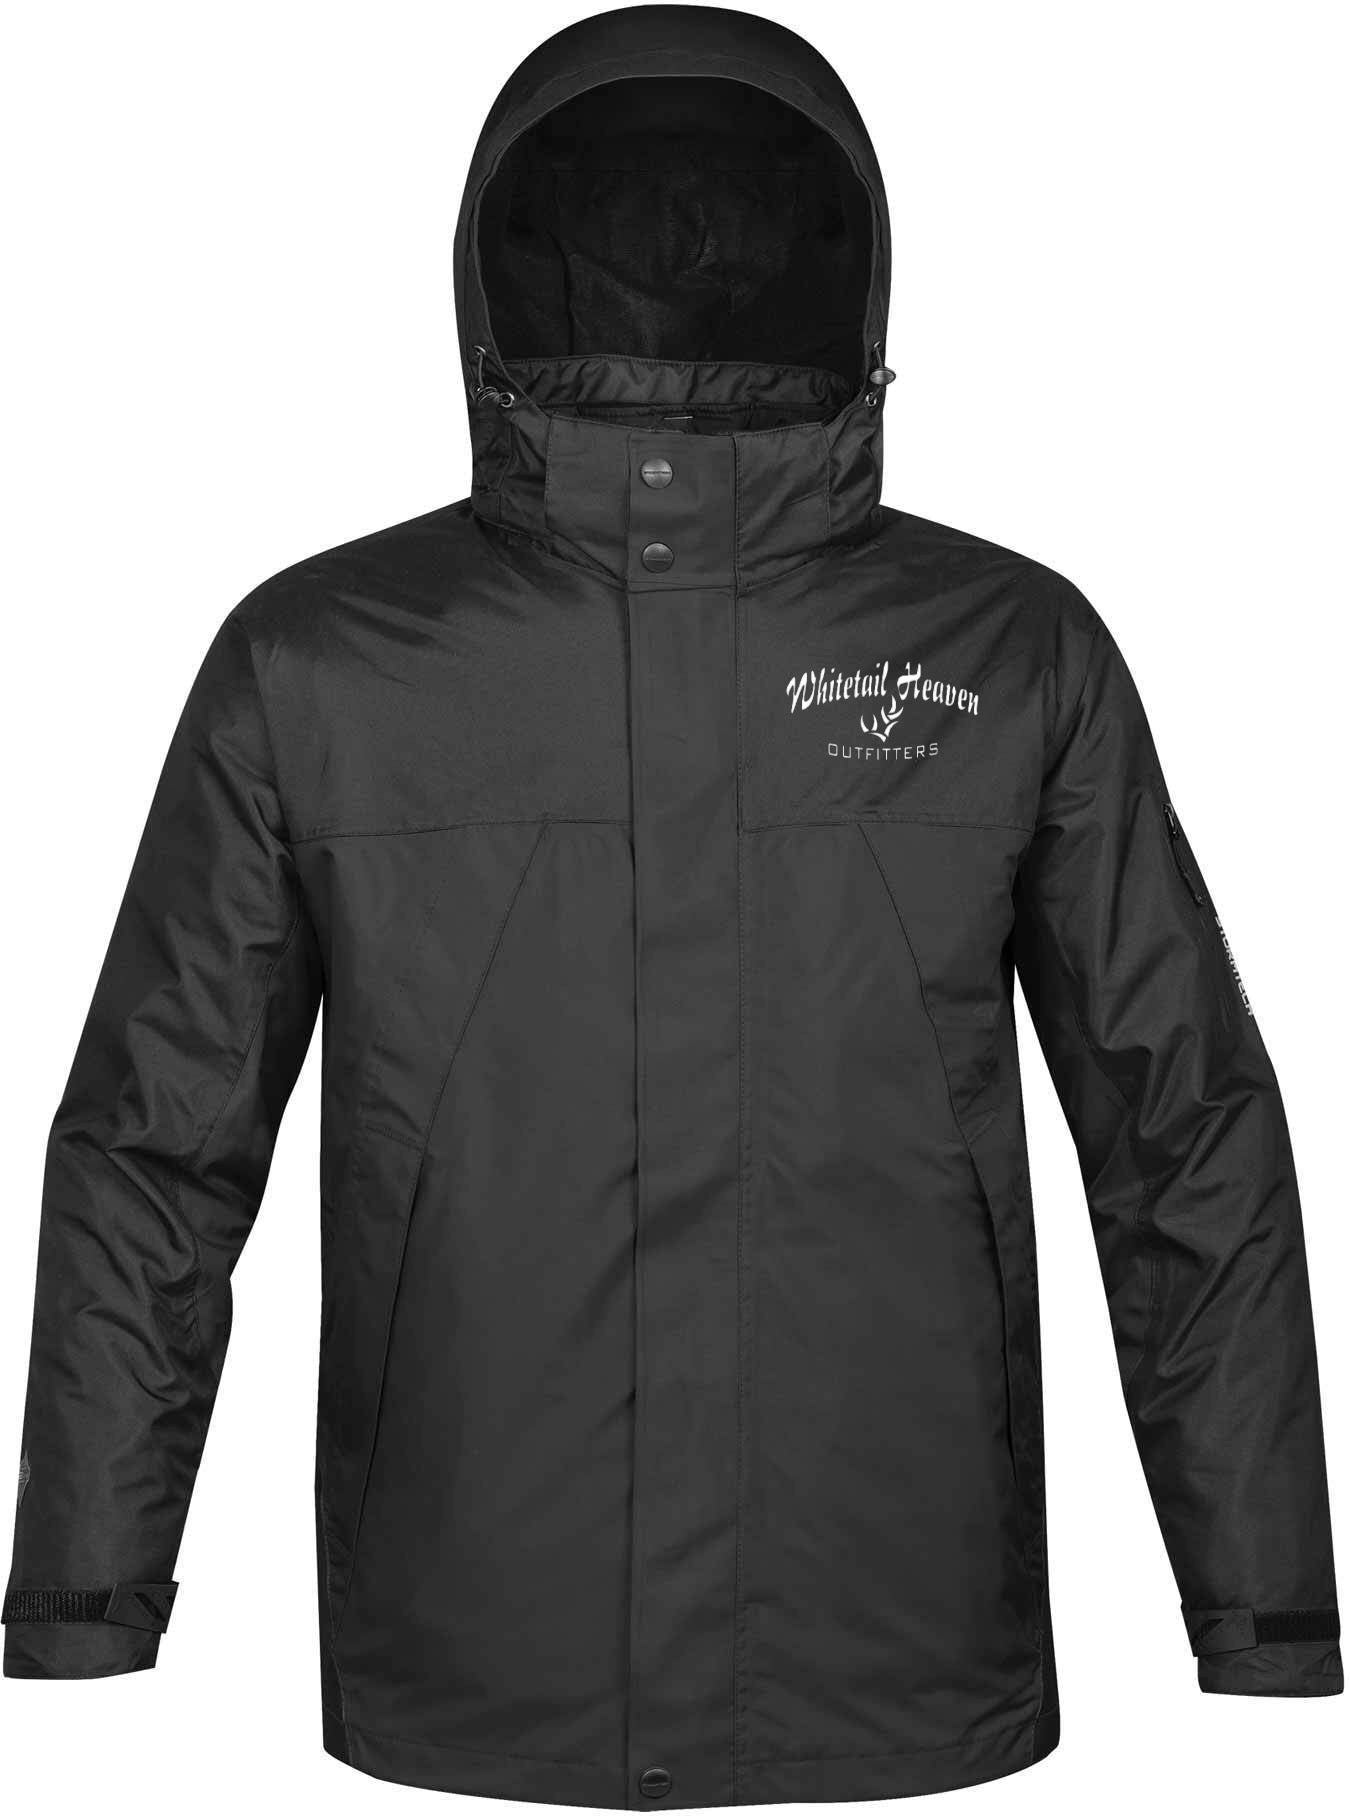 STORMTECH® MEN’S FUSION 5-IN-1 SYSTEM JACKET